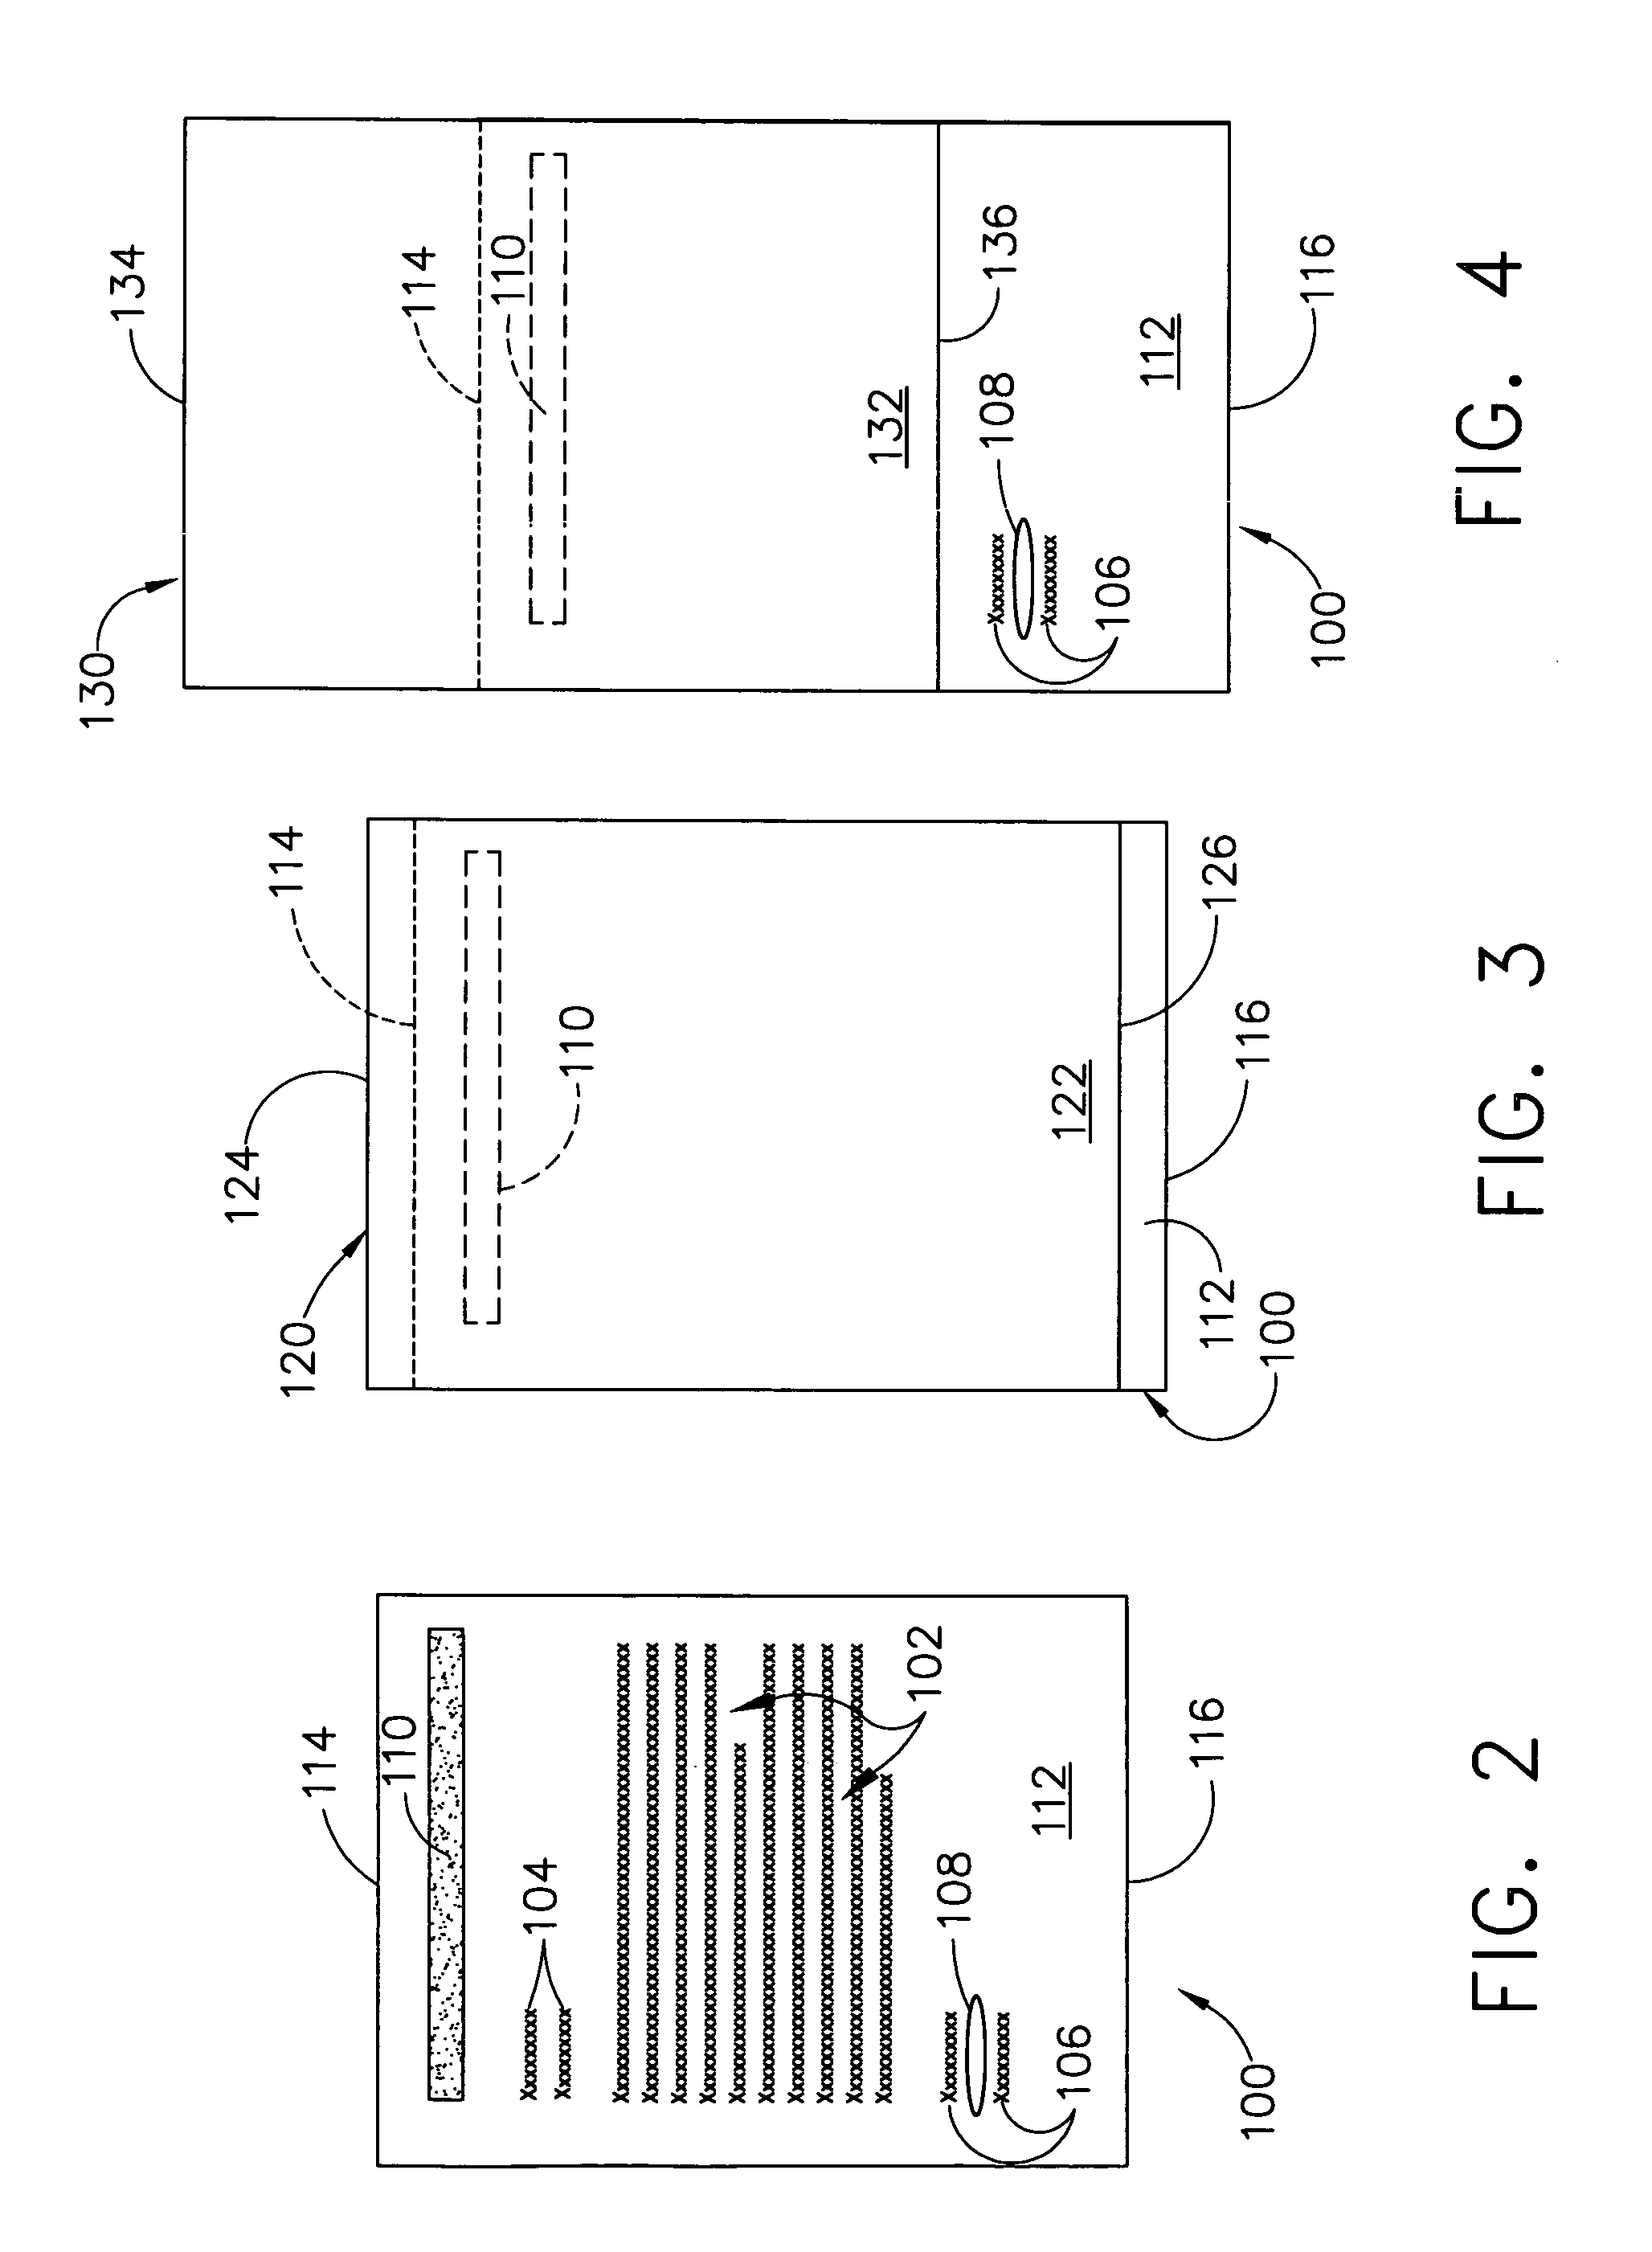 Method and apparatus for adhering sheets of print media together by use of toner in an electrophotographic printer